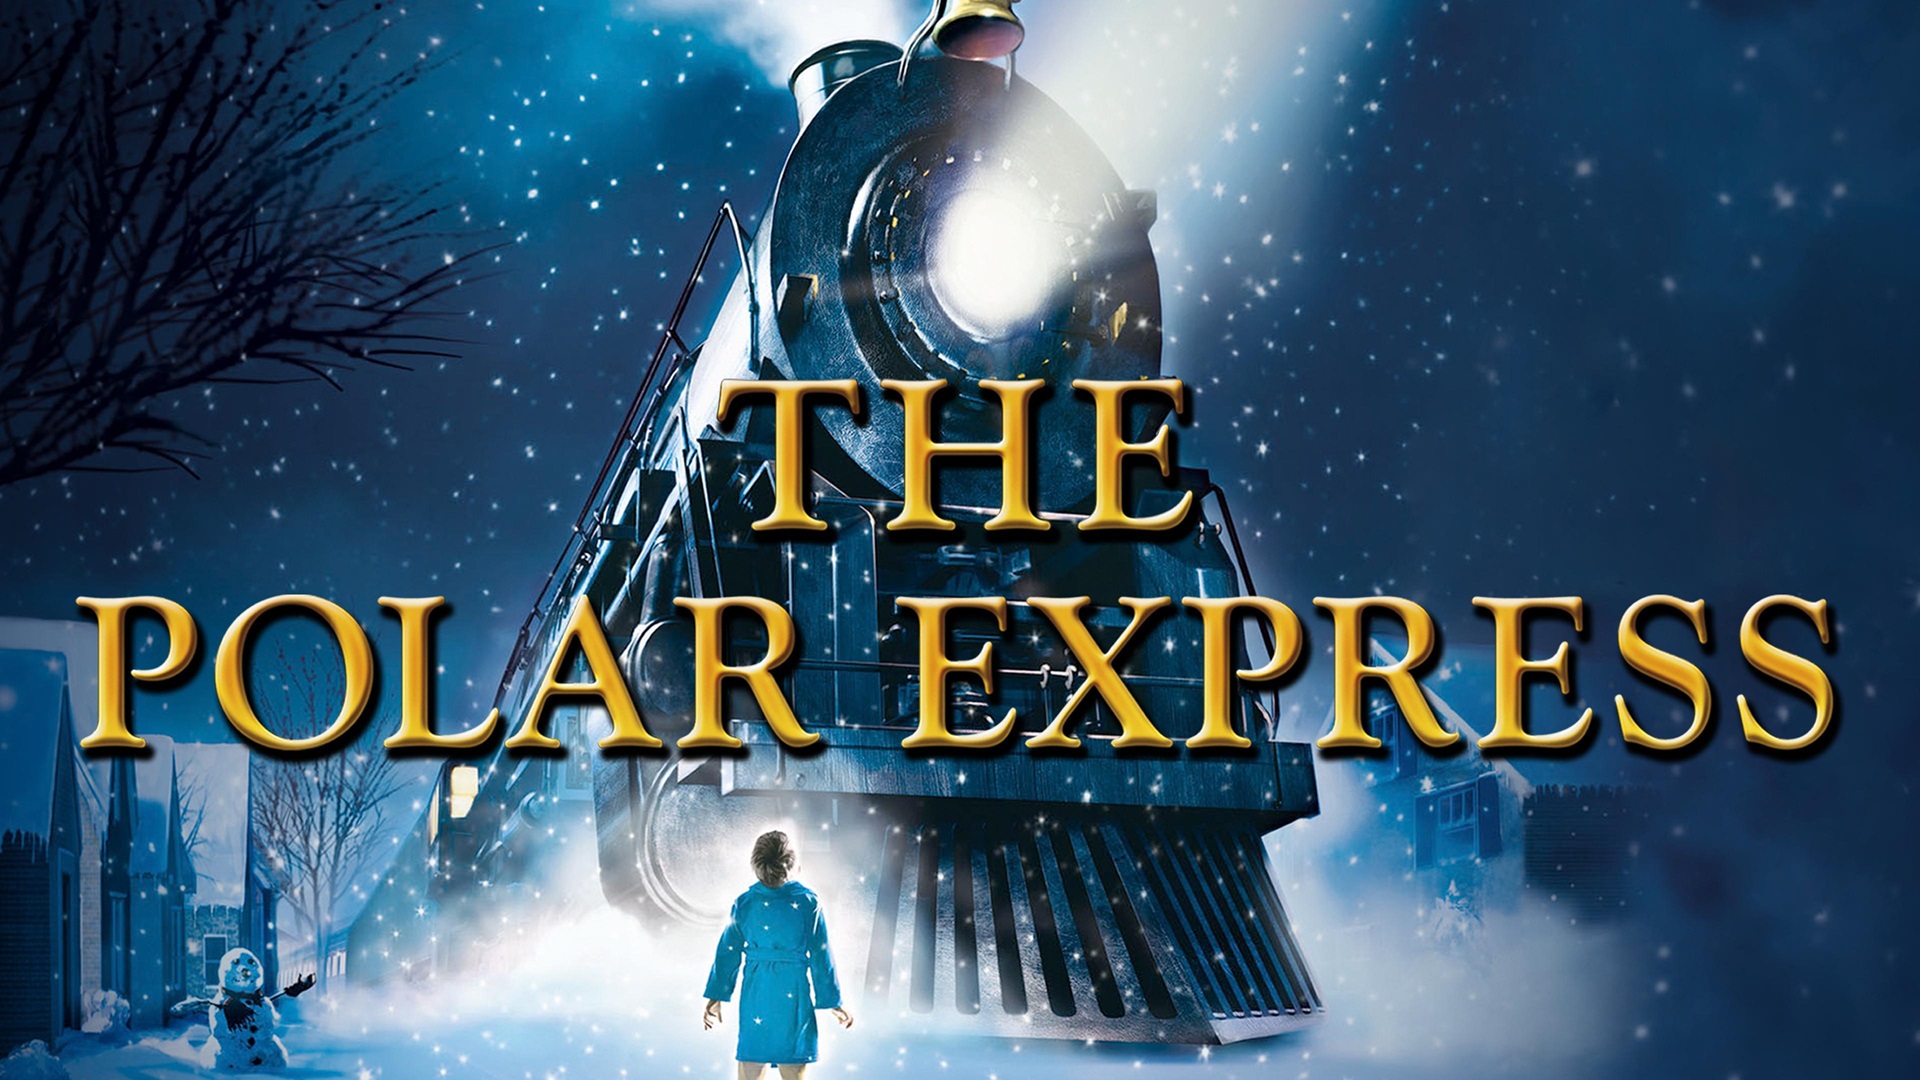 <p>This film starring an animated version of Tom Hanks is based on the book by the same name. A good film to rekindle the magic of Christmas, as it shows the journey of a boy who begun to doubt in the existence of Santa Claus, but a magical train ride changes everything.</p>